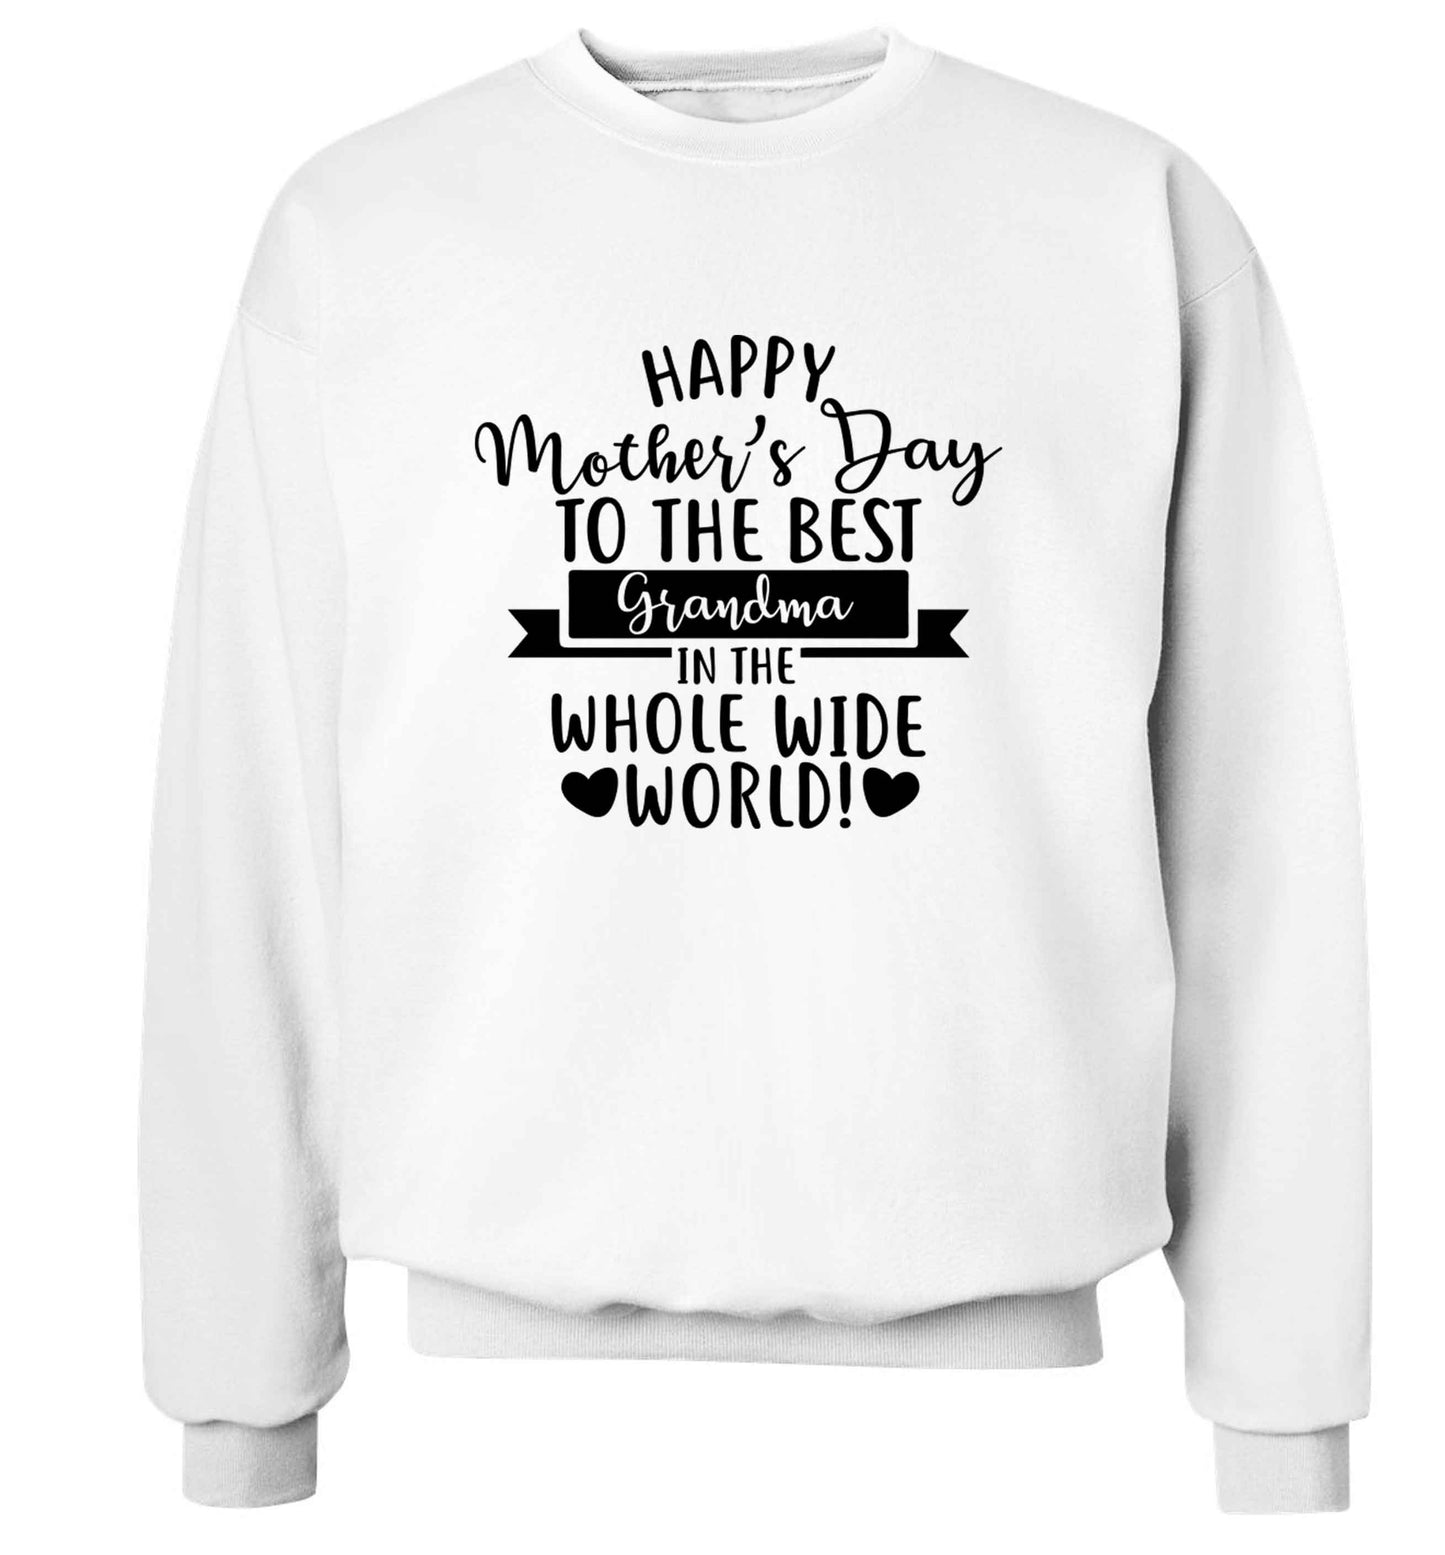 Happy mother's day to the best grandma in the world adult's unisex white sweater 2XL